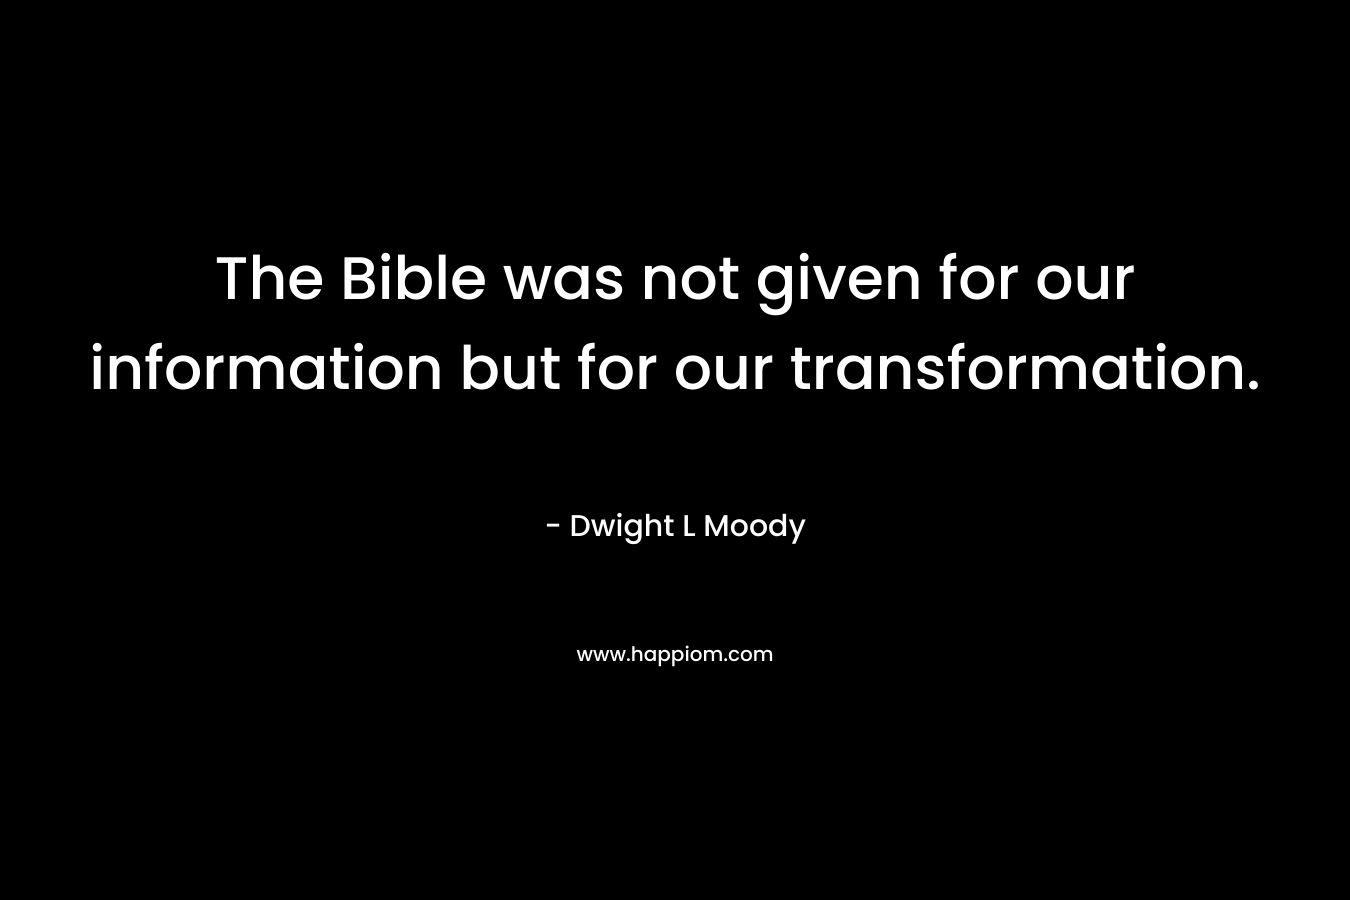 The Bible was not given for our information but for our transformation.